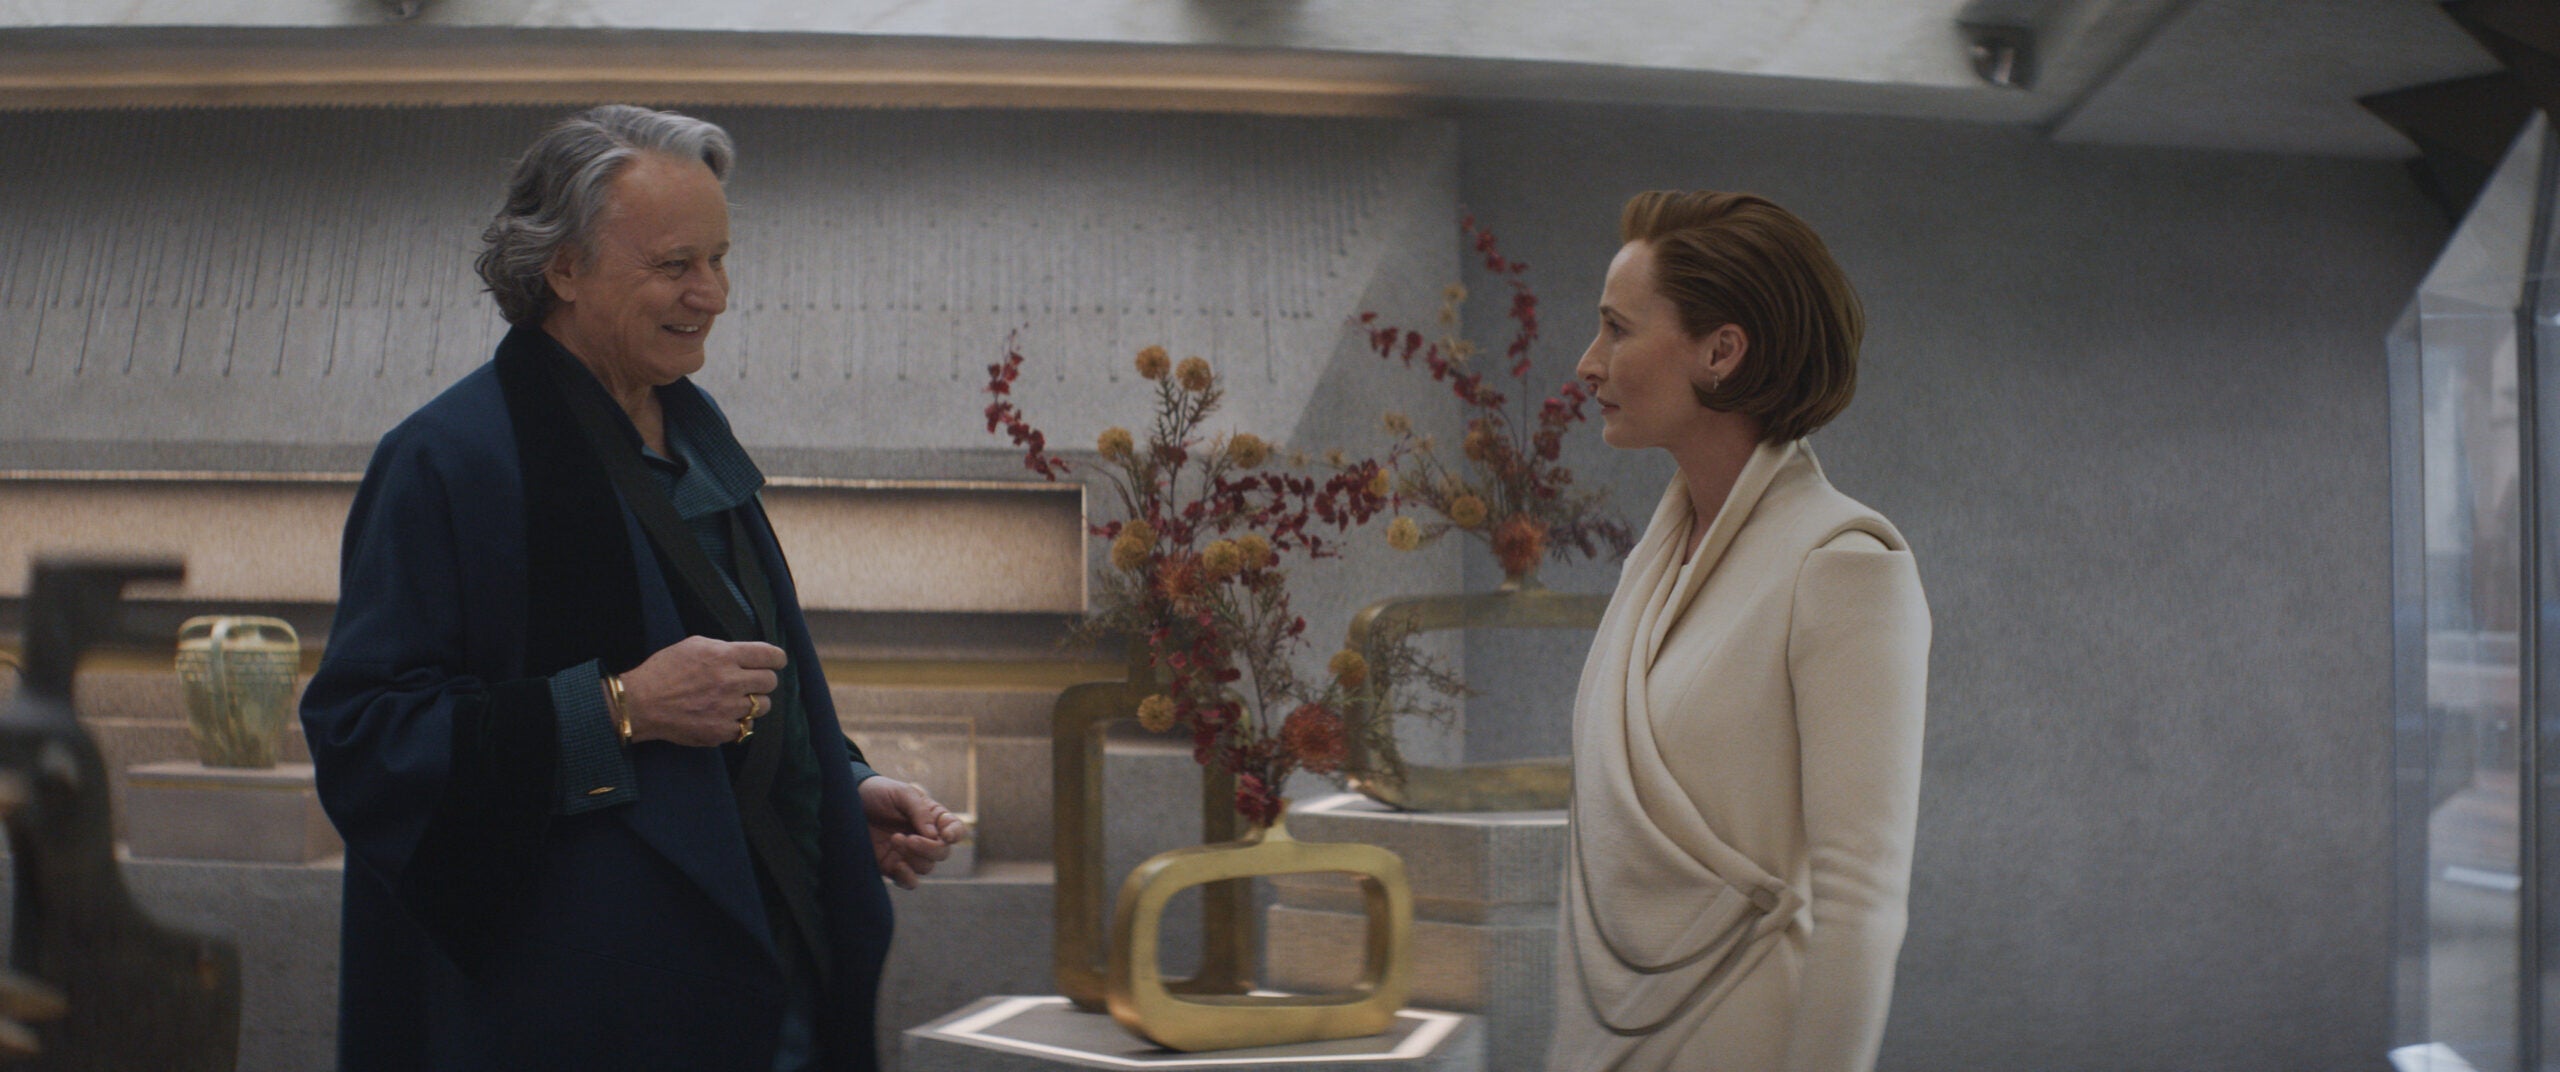 (L-R): Luthen Rael (Stellan Skarsgard) and Mon Mothma (Genevieve O'Reilly) in Lucasfilm's ANDOR, exclusively on Disney+. ©2022 Lucasfilm Ltd. &amp; TM. All Rights Reserved.